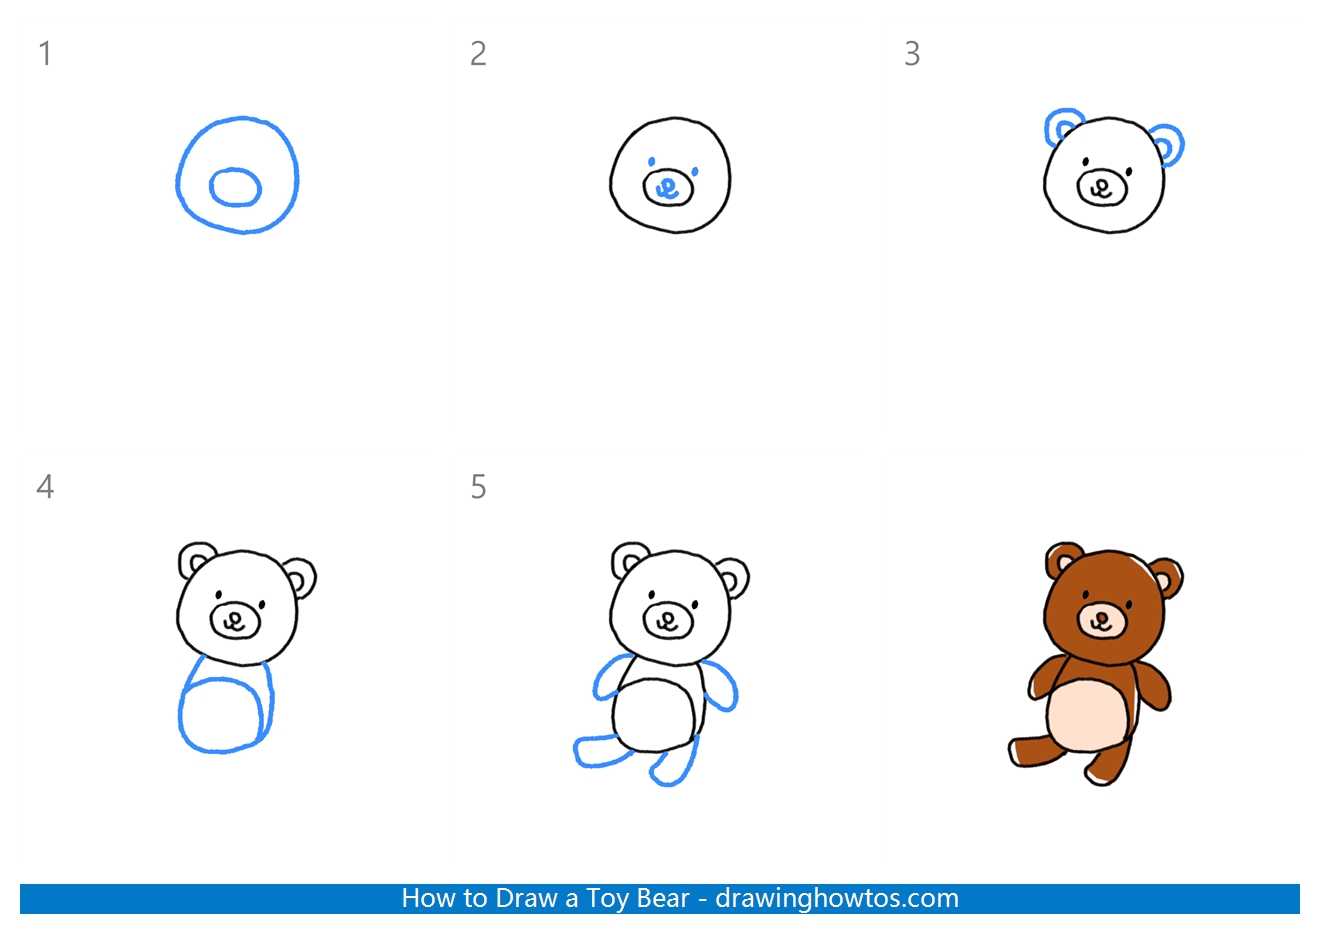 How to Draw a Toy Bear Step by Step